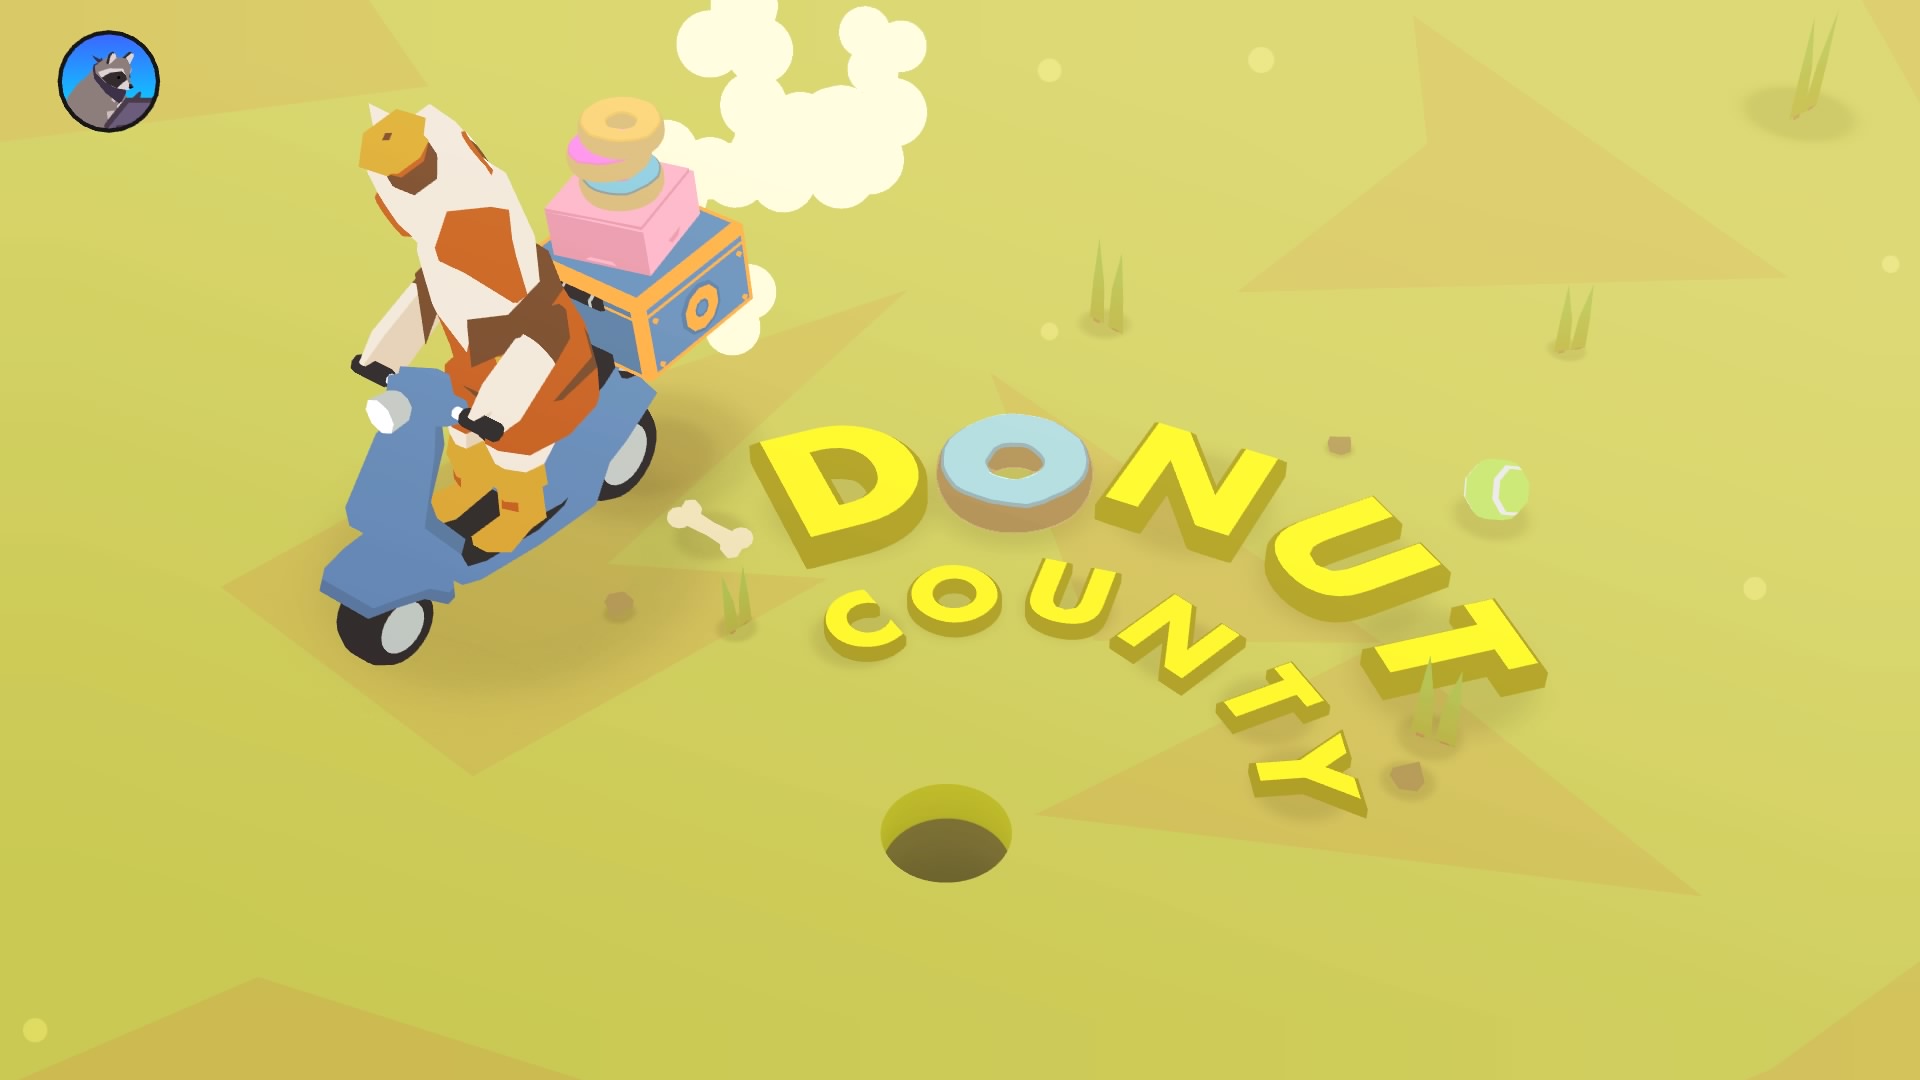 free download donut county switch physical